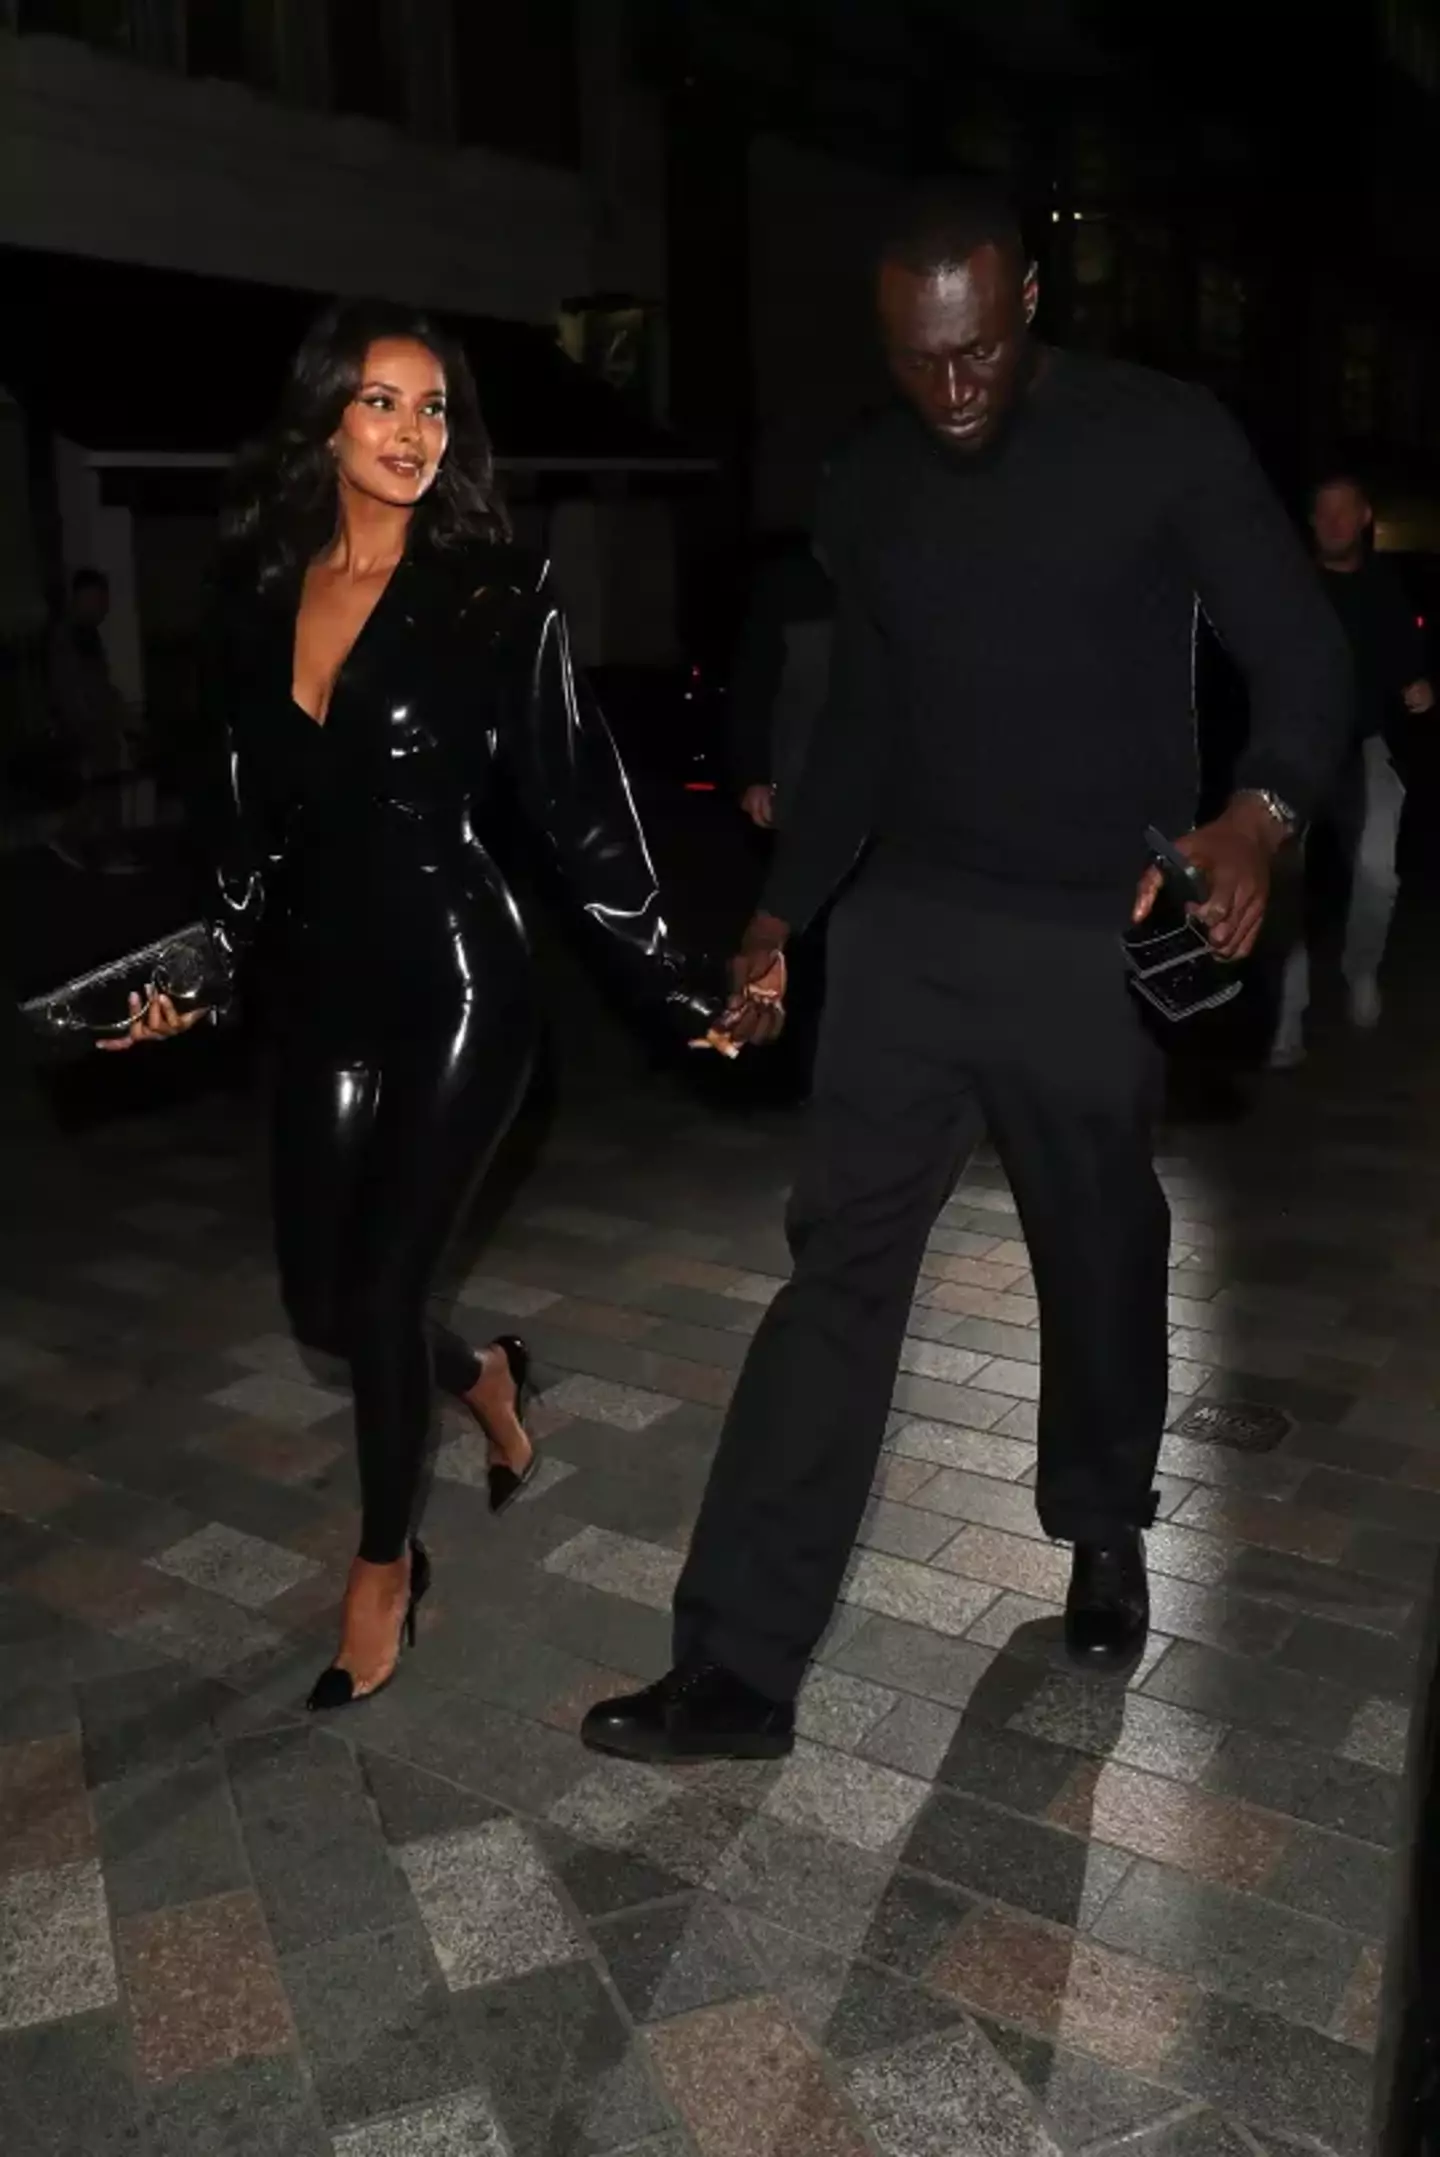 Maya looked radiant as she beamed at Stormzy while heading into the Vogue bash.